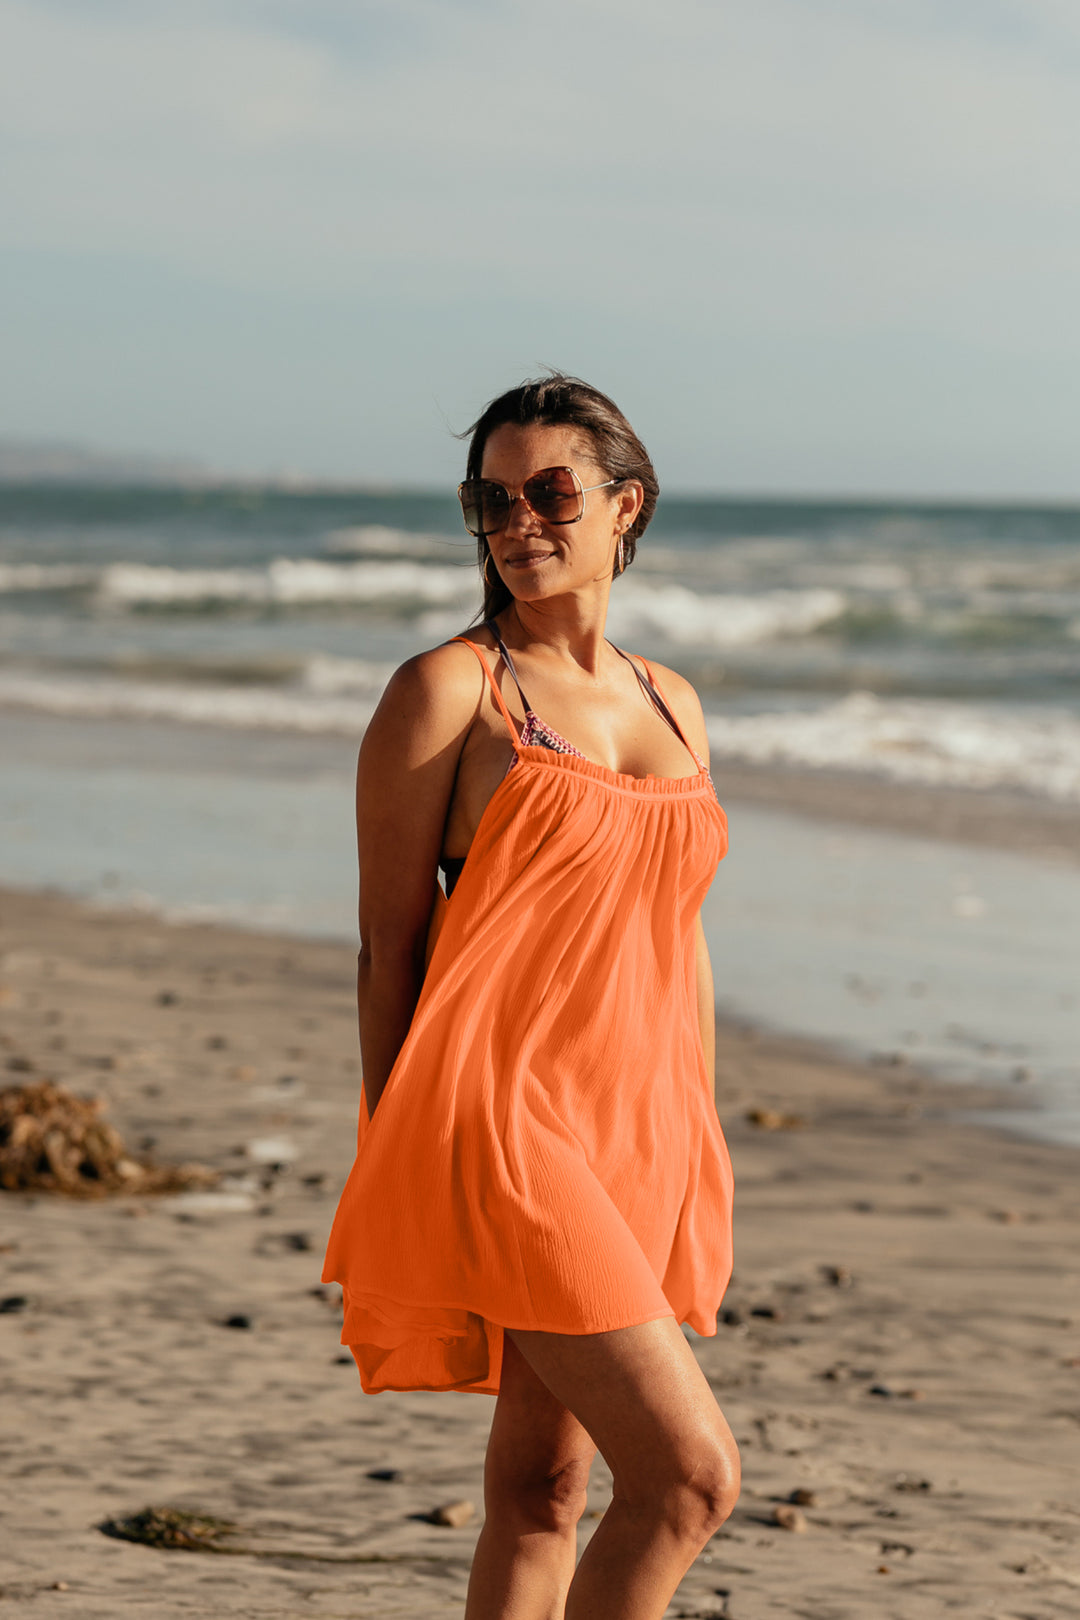 Bette cover up: Woman standing by the ocean wearing Bette's Amalie mini cover up in citrus